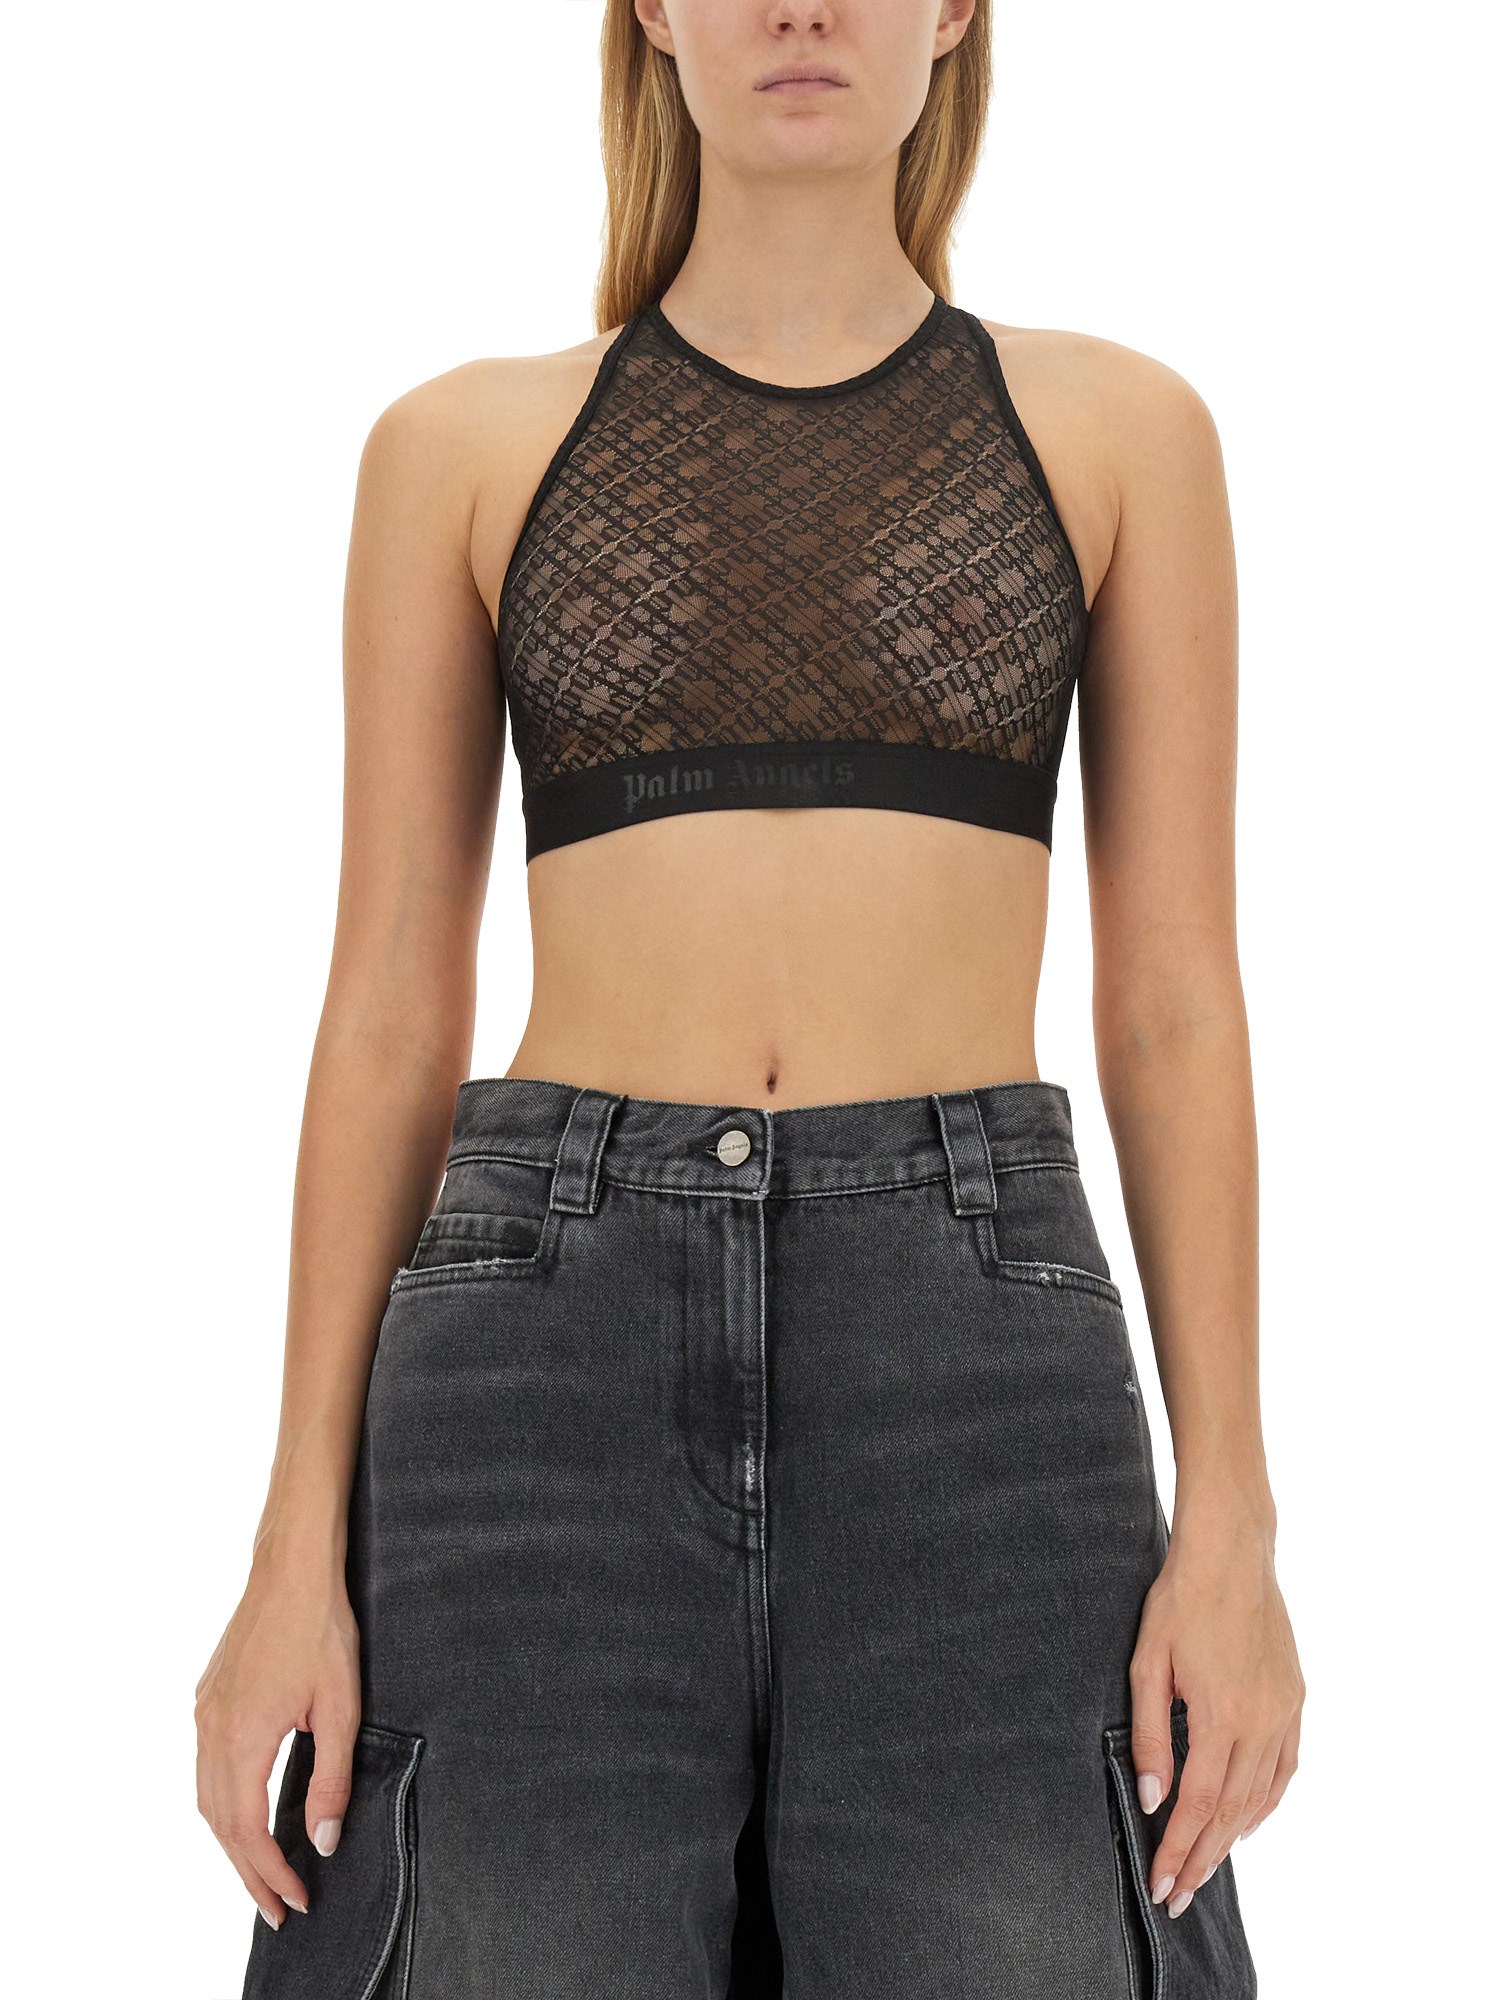 palm angels lace america top